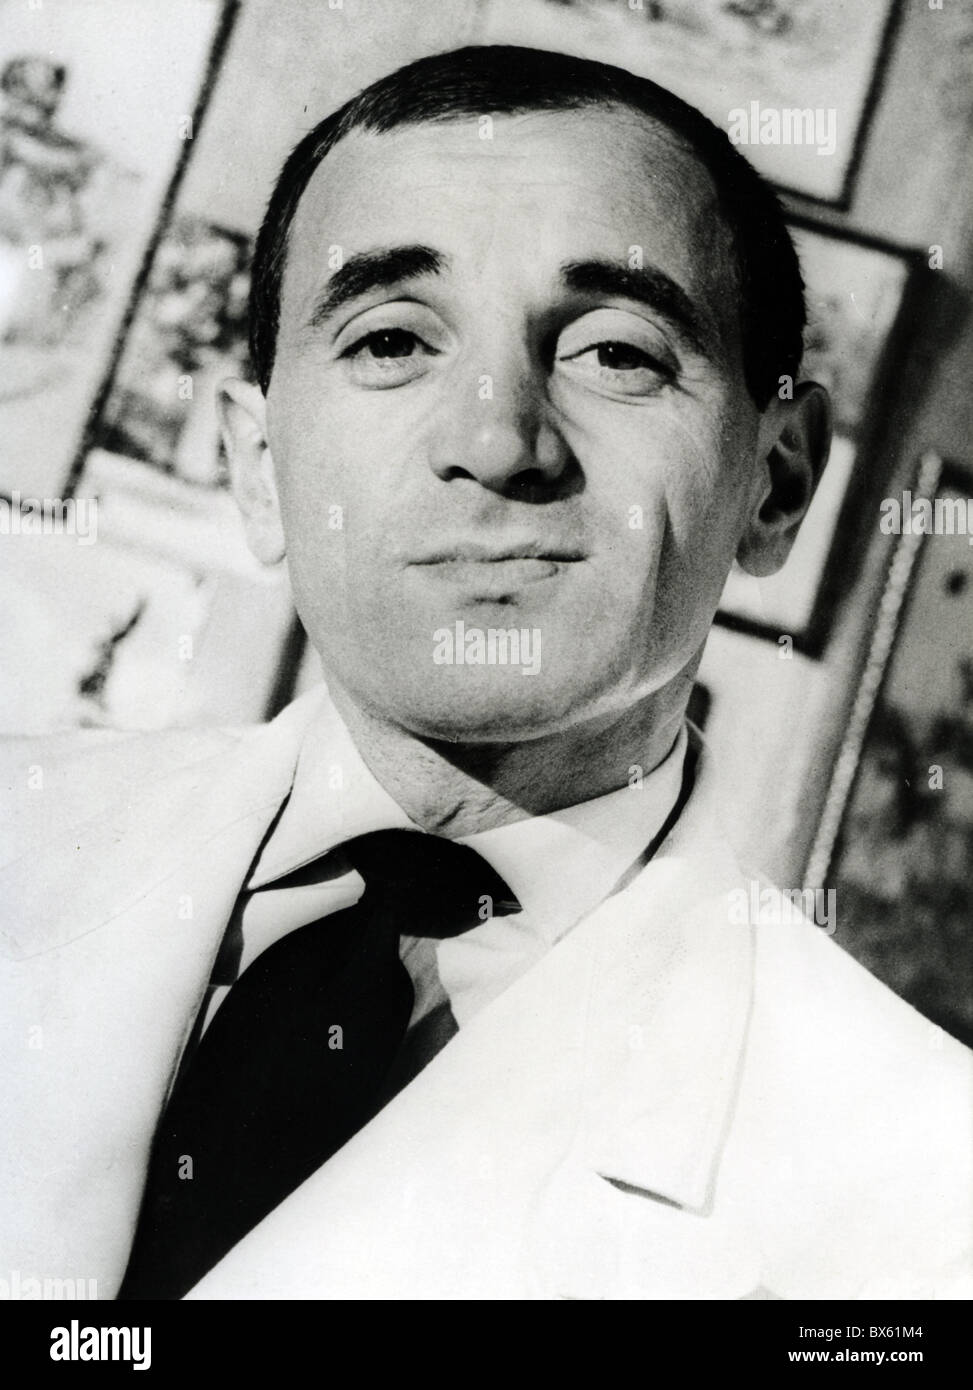 CHARLES AZNAVOUR Armenian-French cantante, compositor y actor Foto de stock